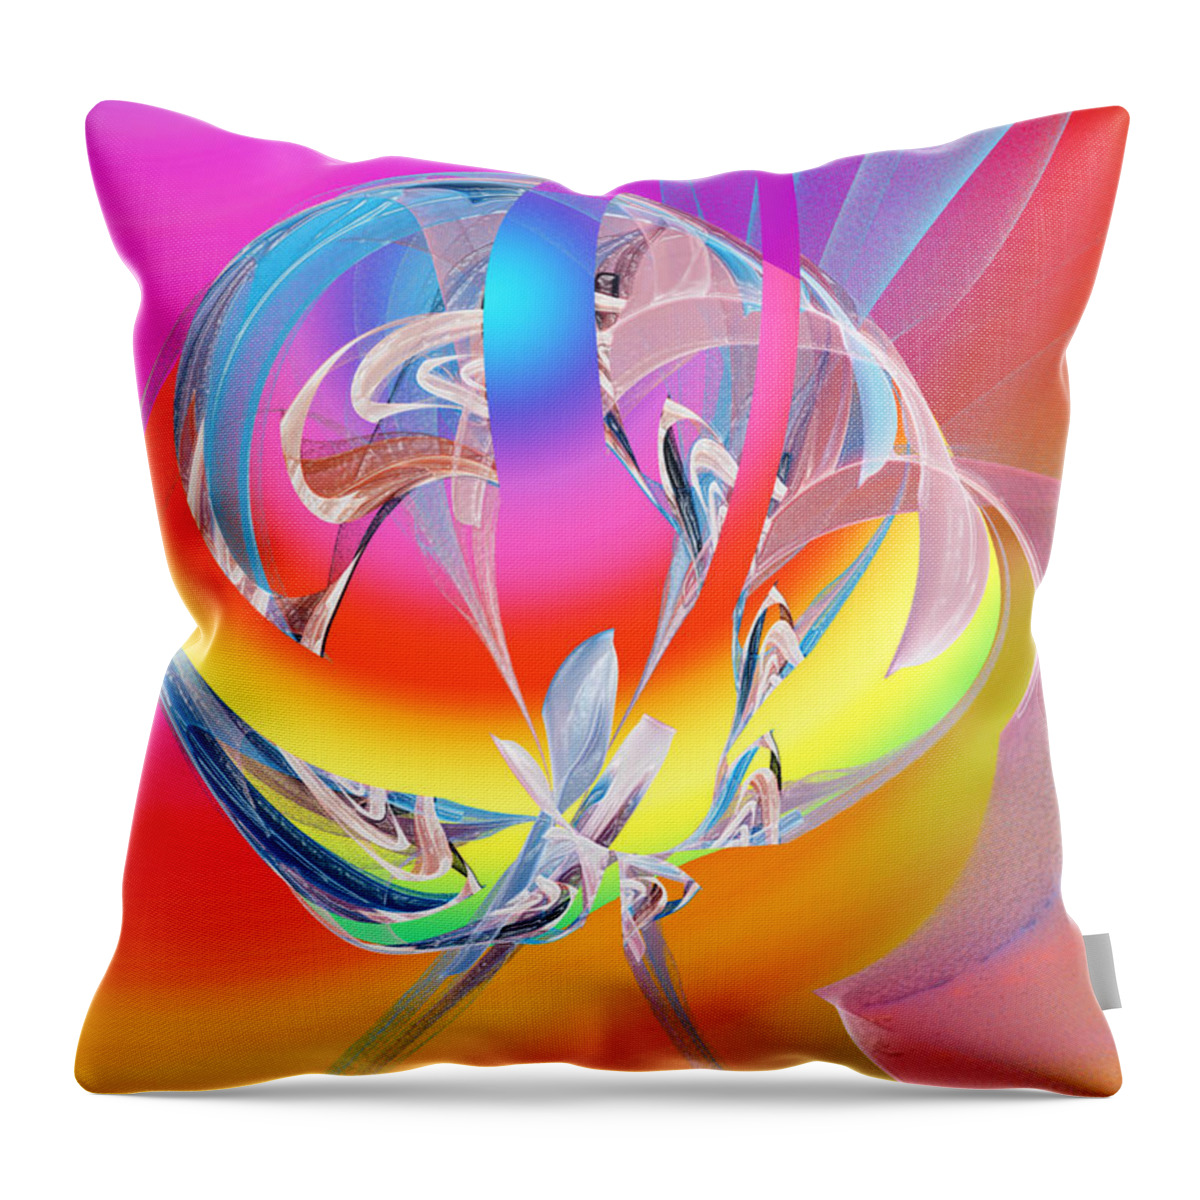 Abstract Throw Pillow featuring the digital art Circling Saturn by Andee Design